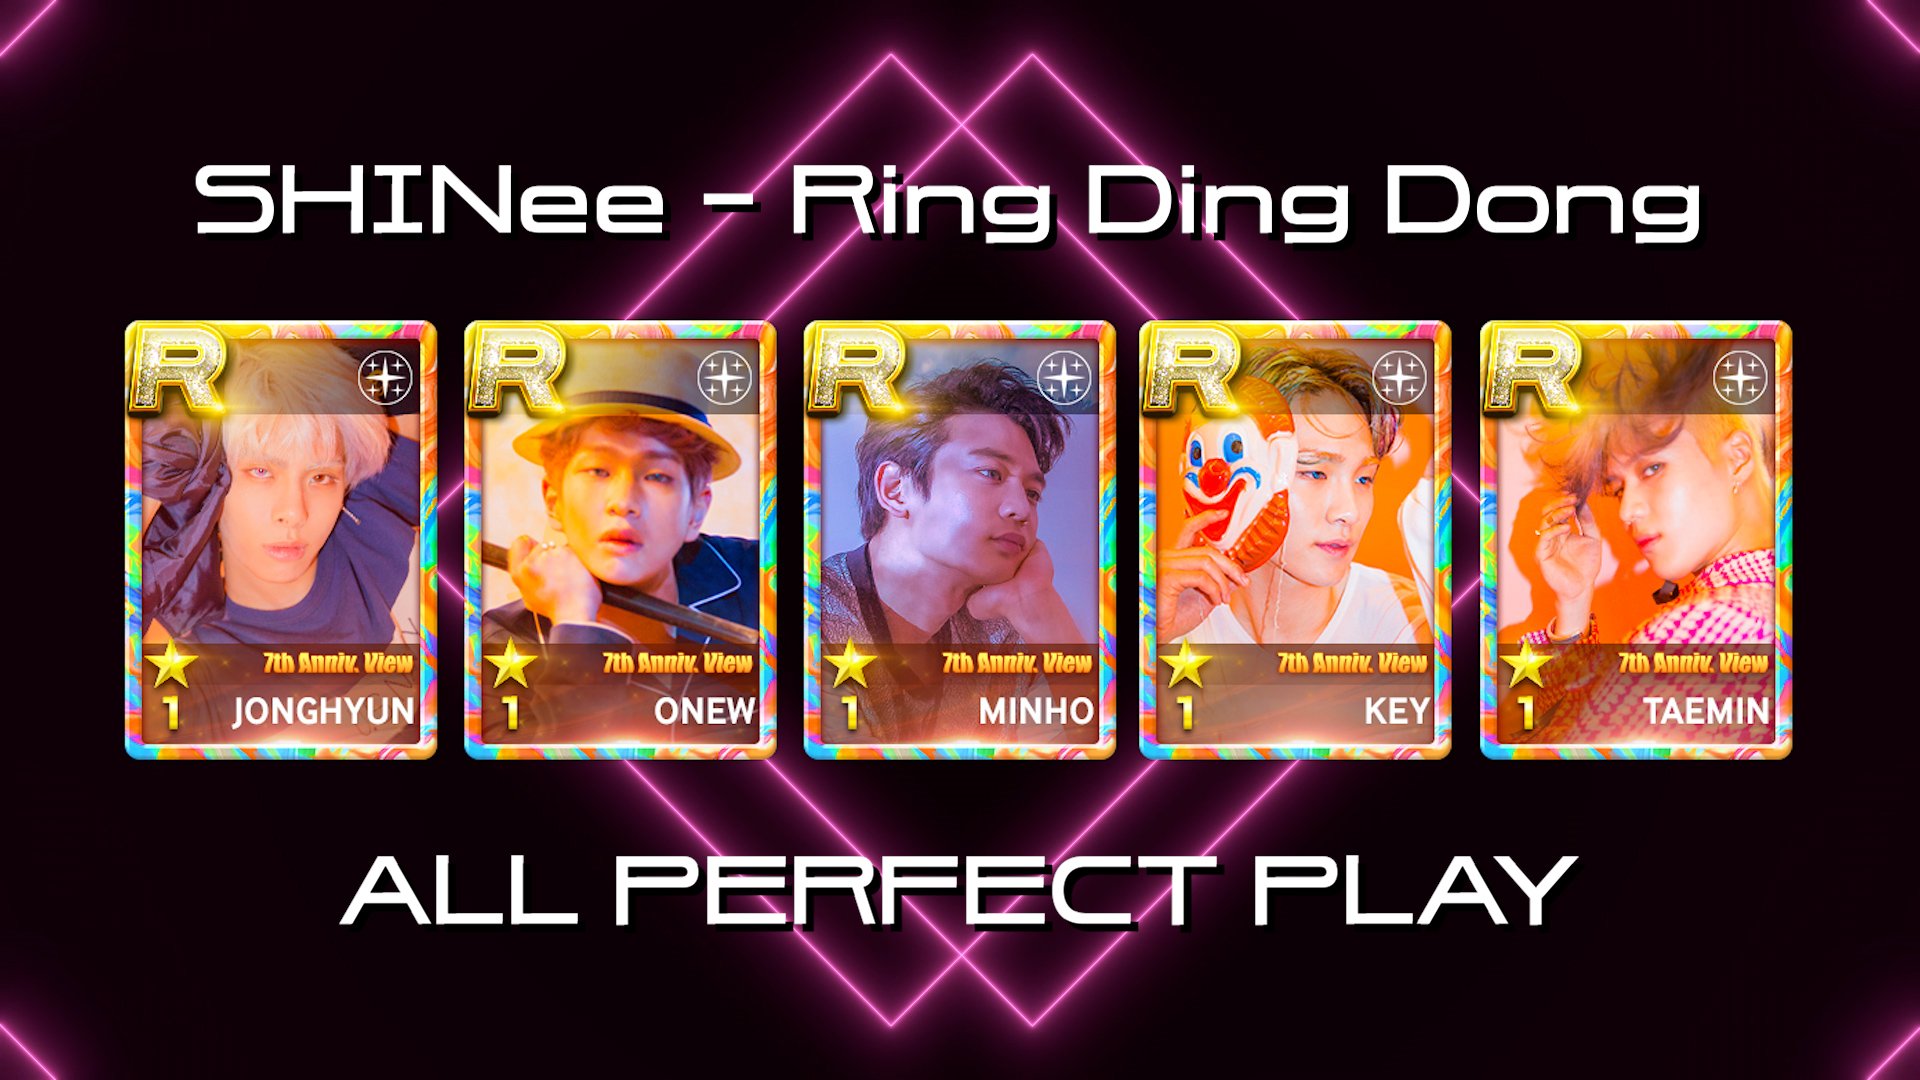 Kpop shinee ring ding dong GIF - Find on GIFER